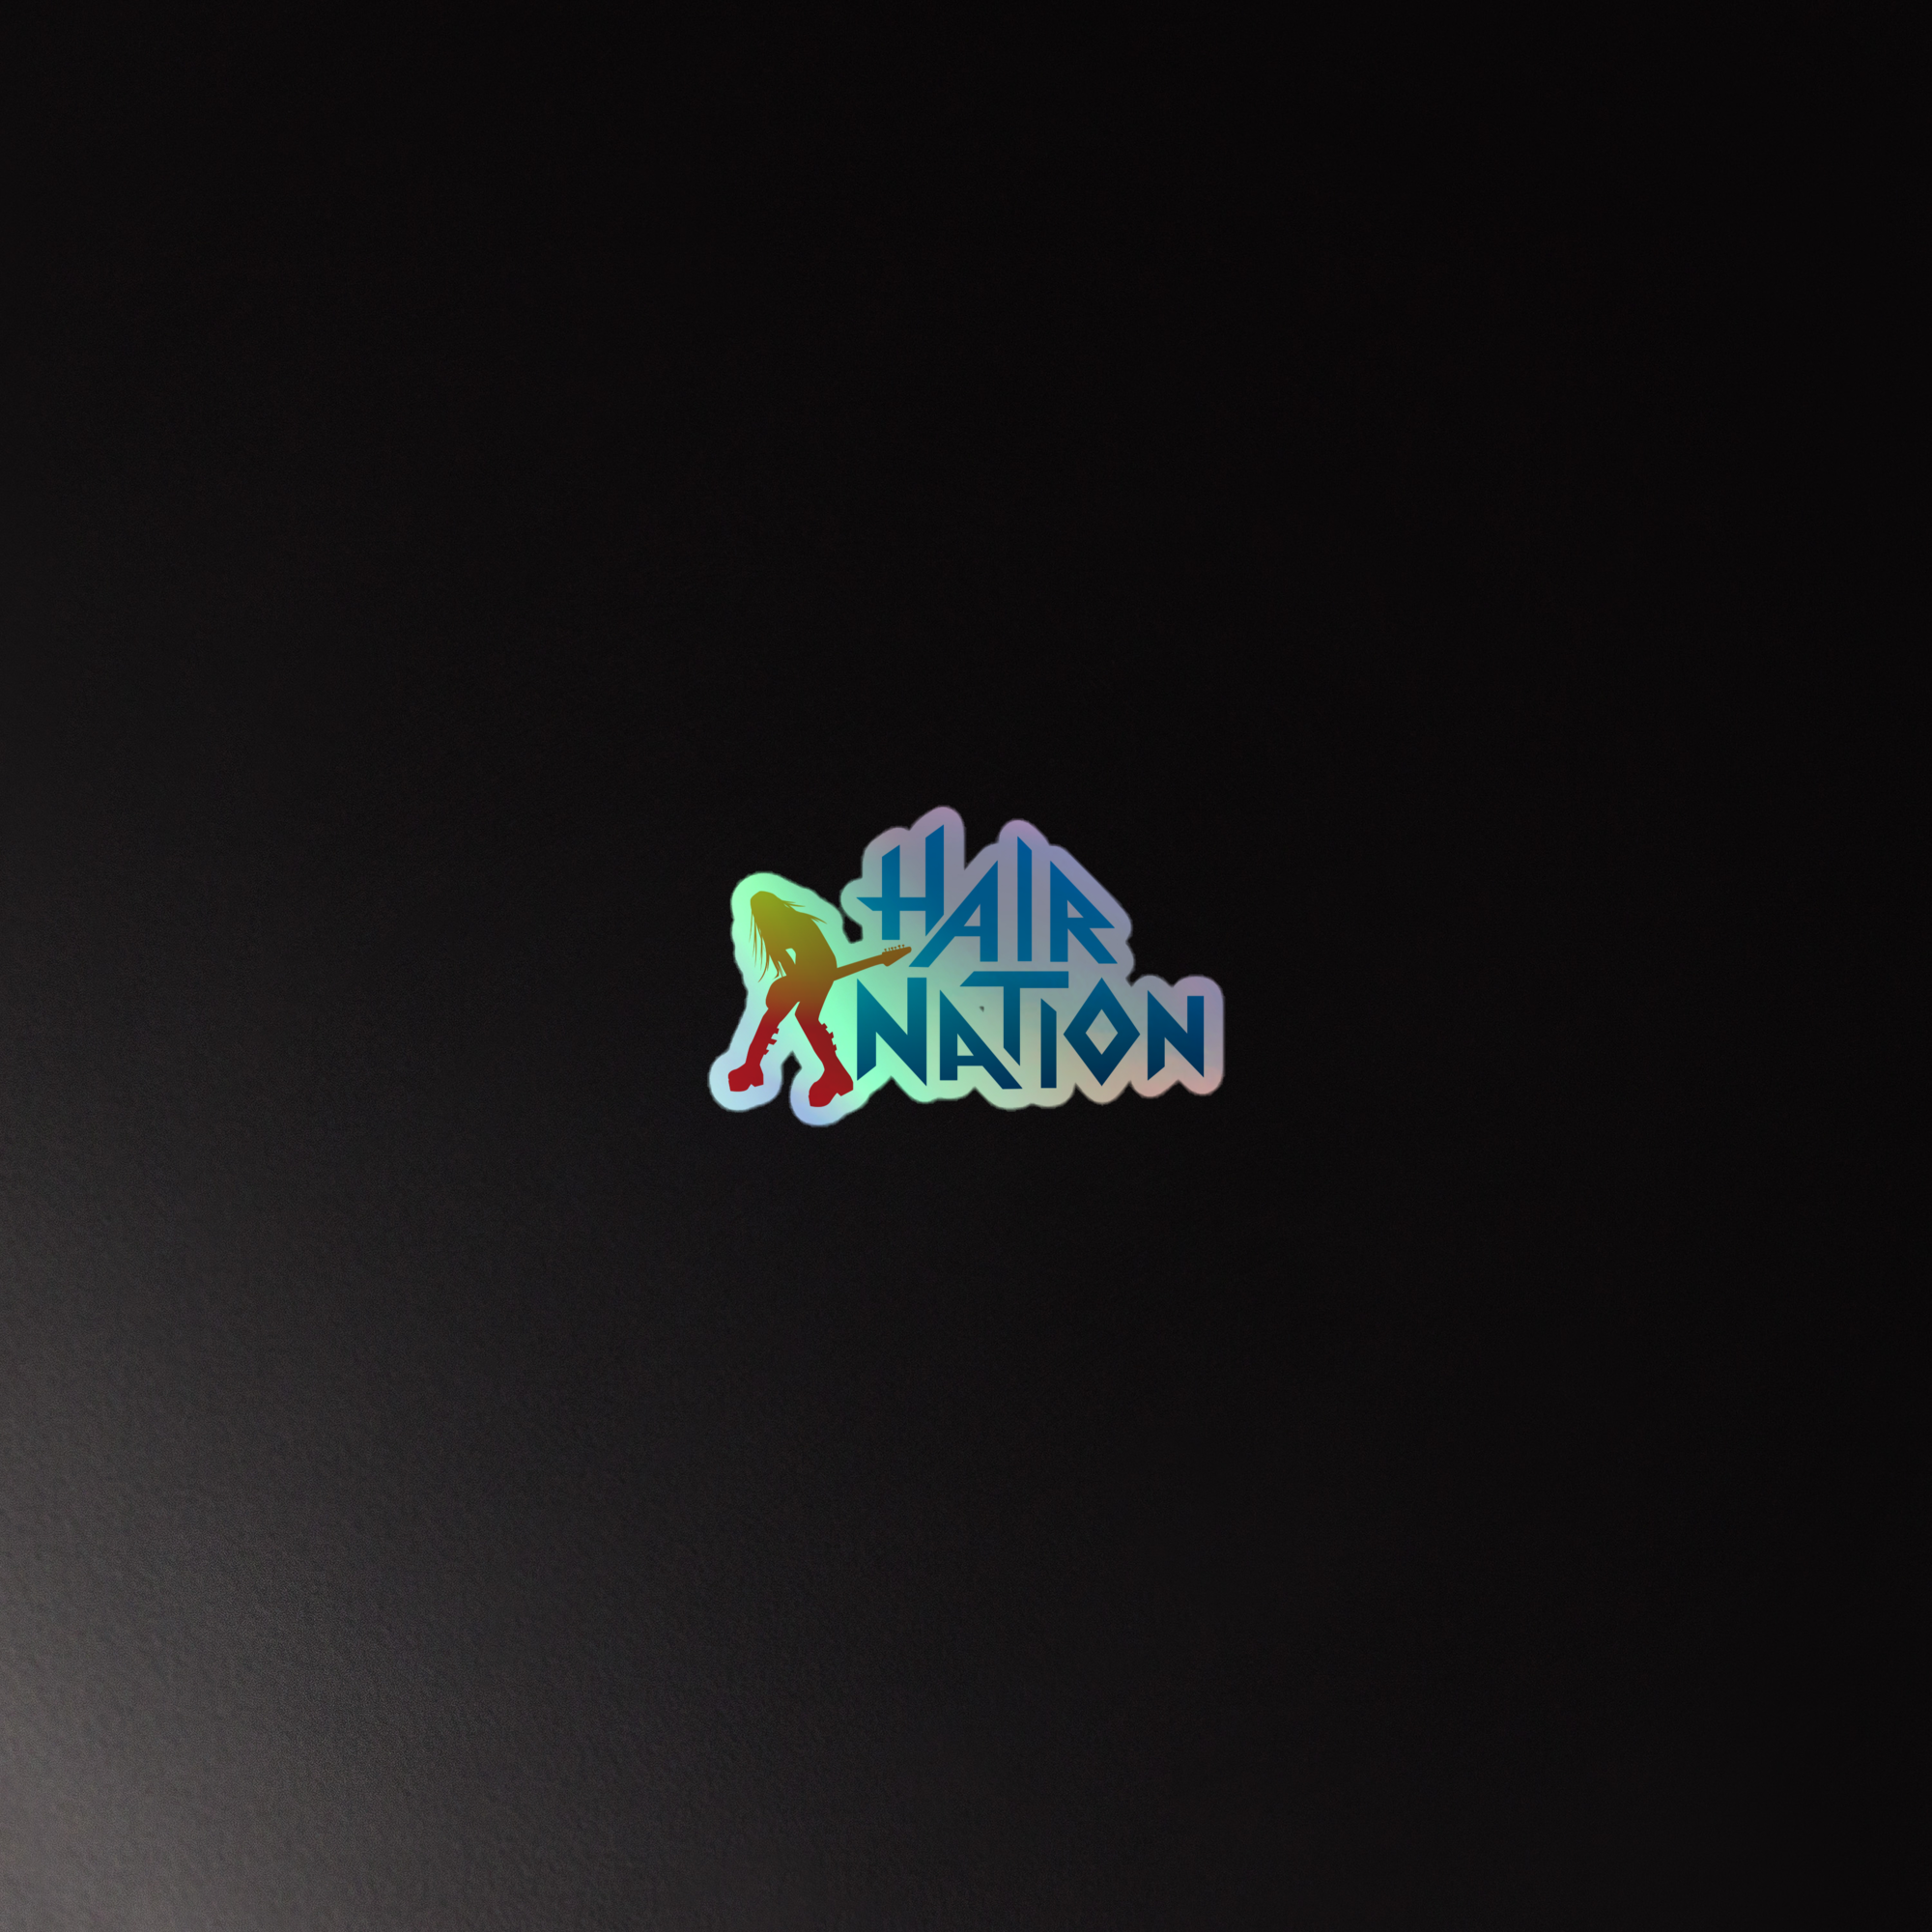 Hair Nation: Holographic Sticker